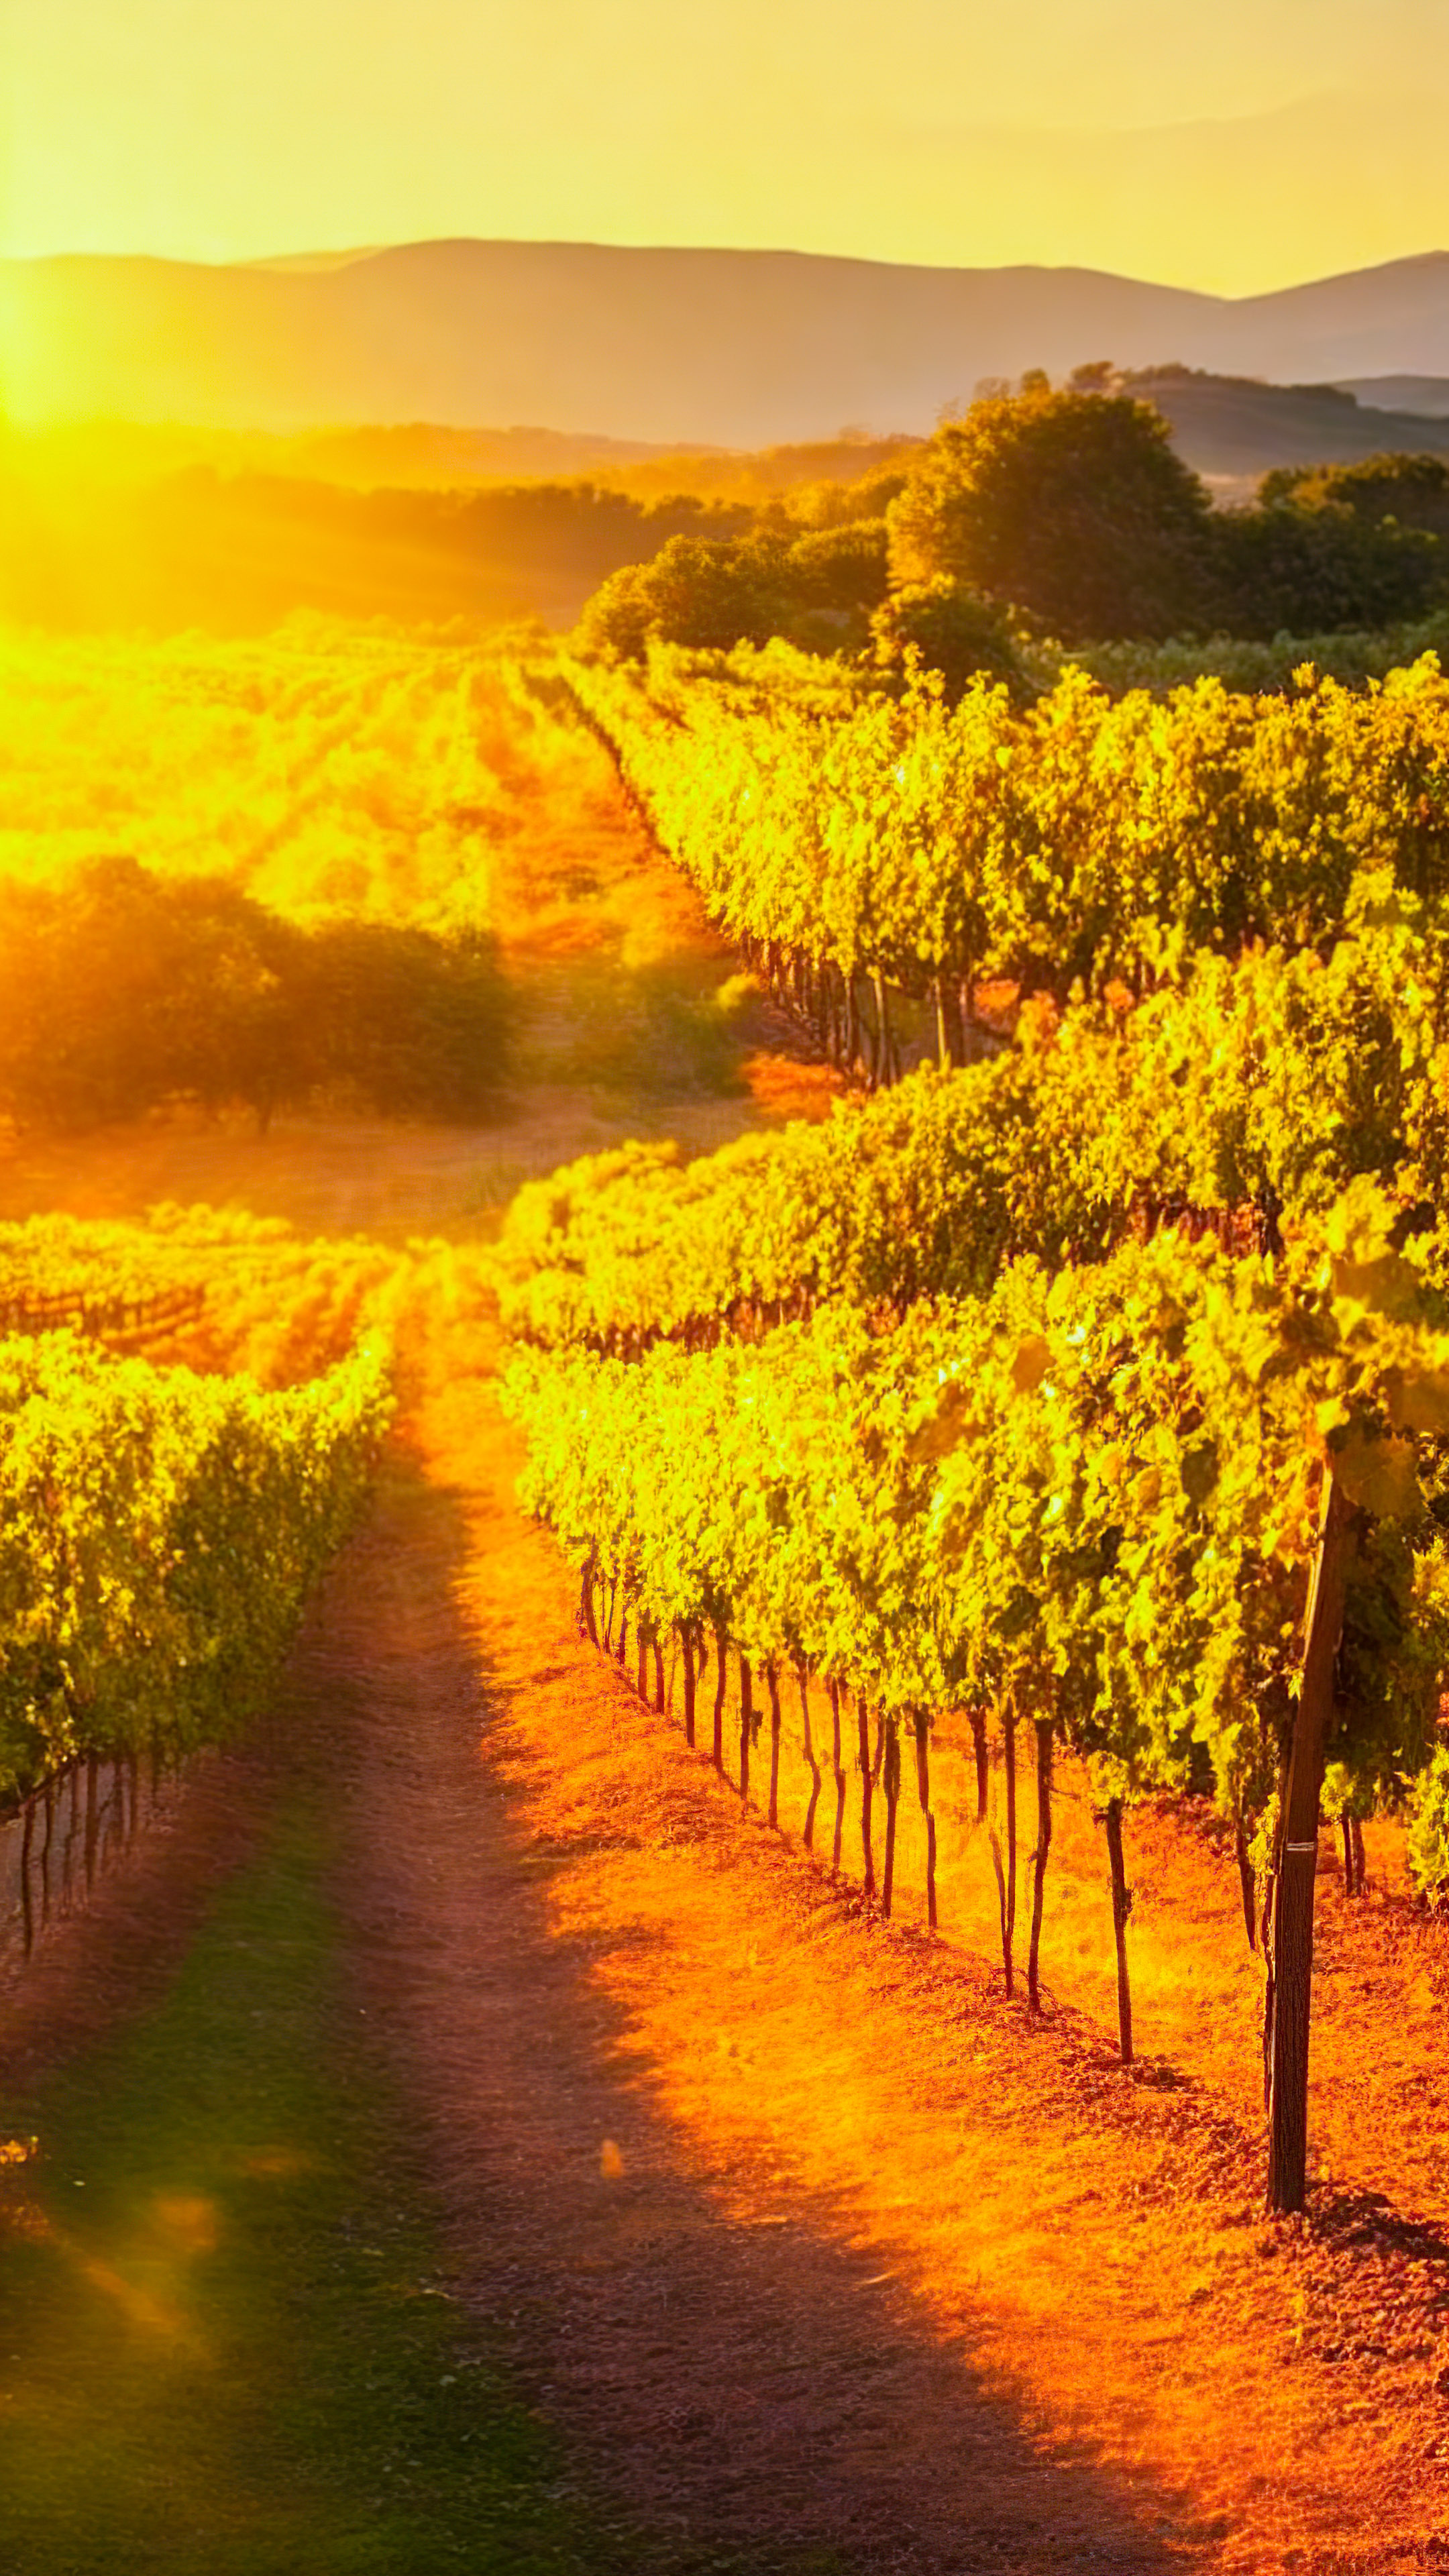 Download the serenity of the vineyard with our sunset landscape wallpaper for mobile, capturing a picturesque vineyard bathed in golden sunlight, with rows of grapevines stretching into the distance.